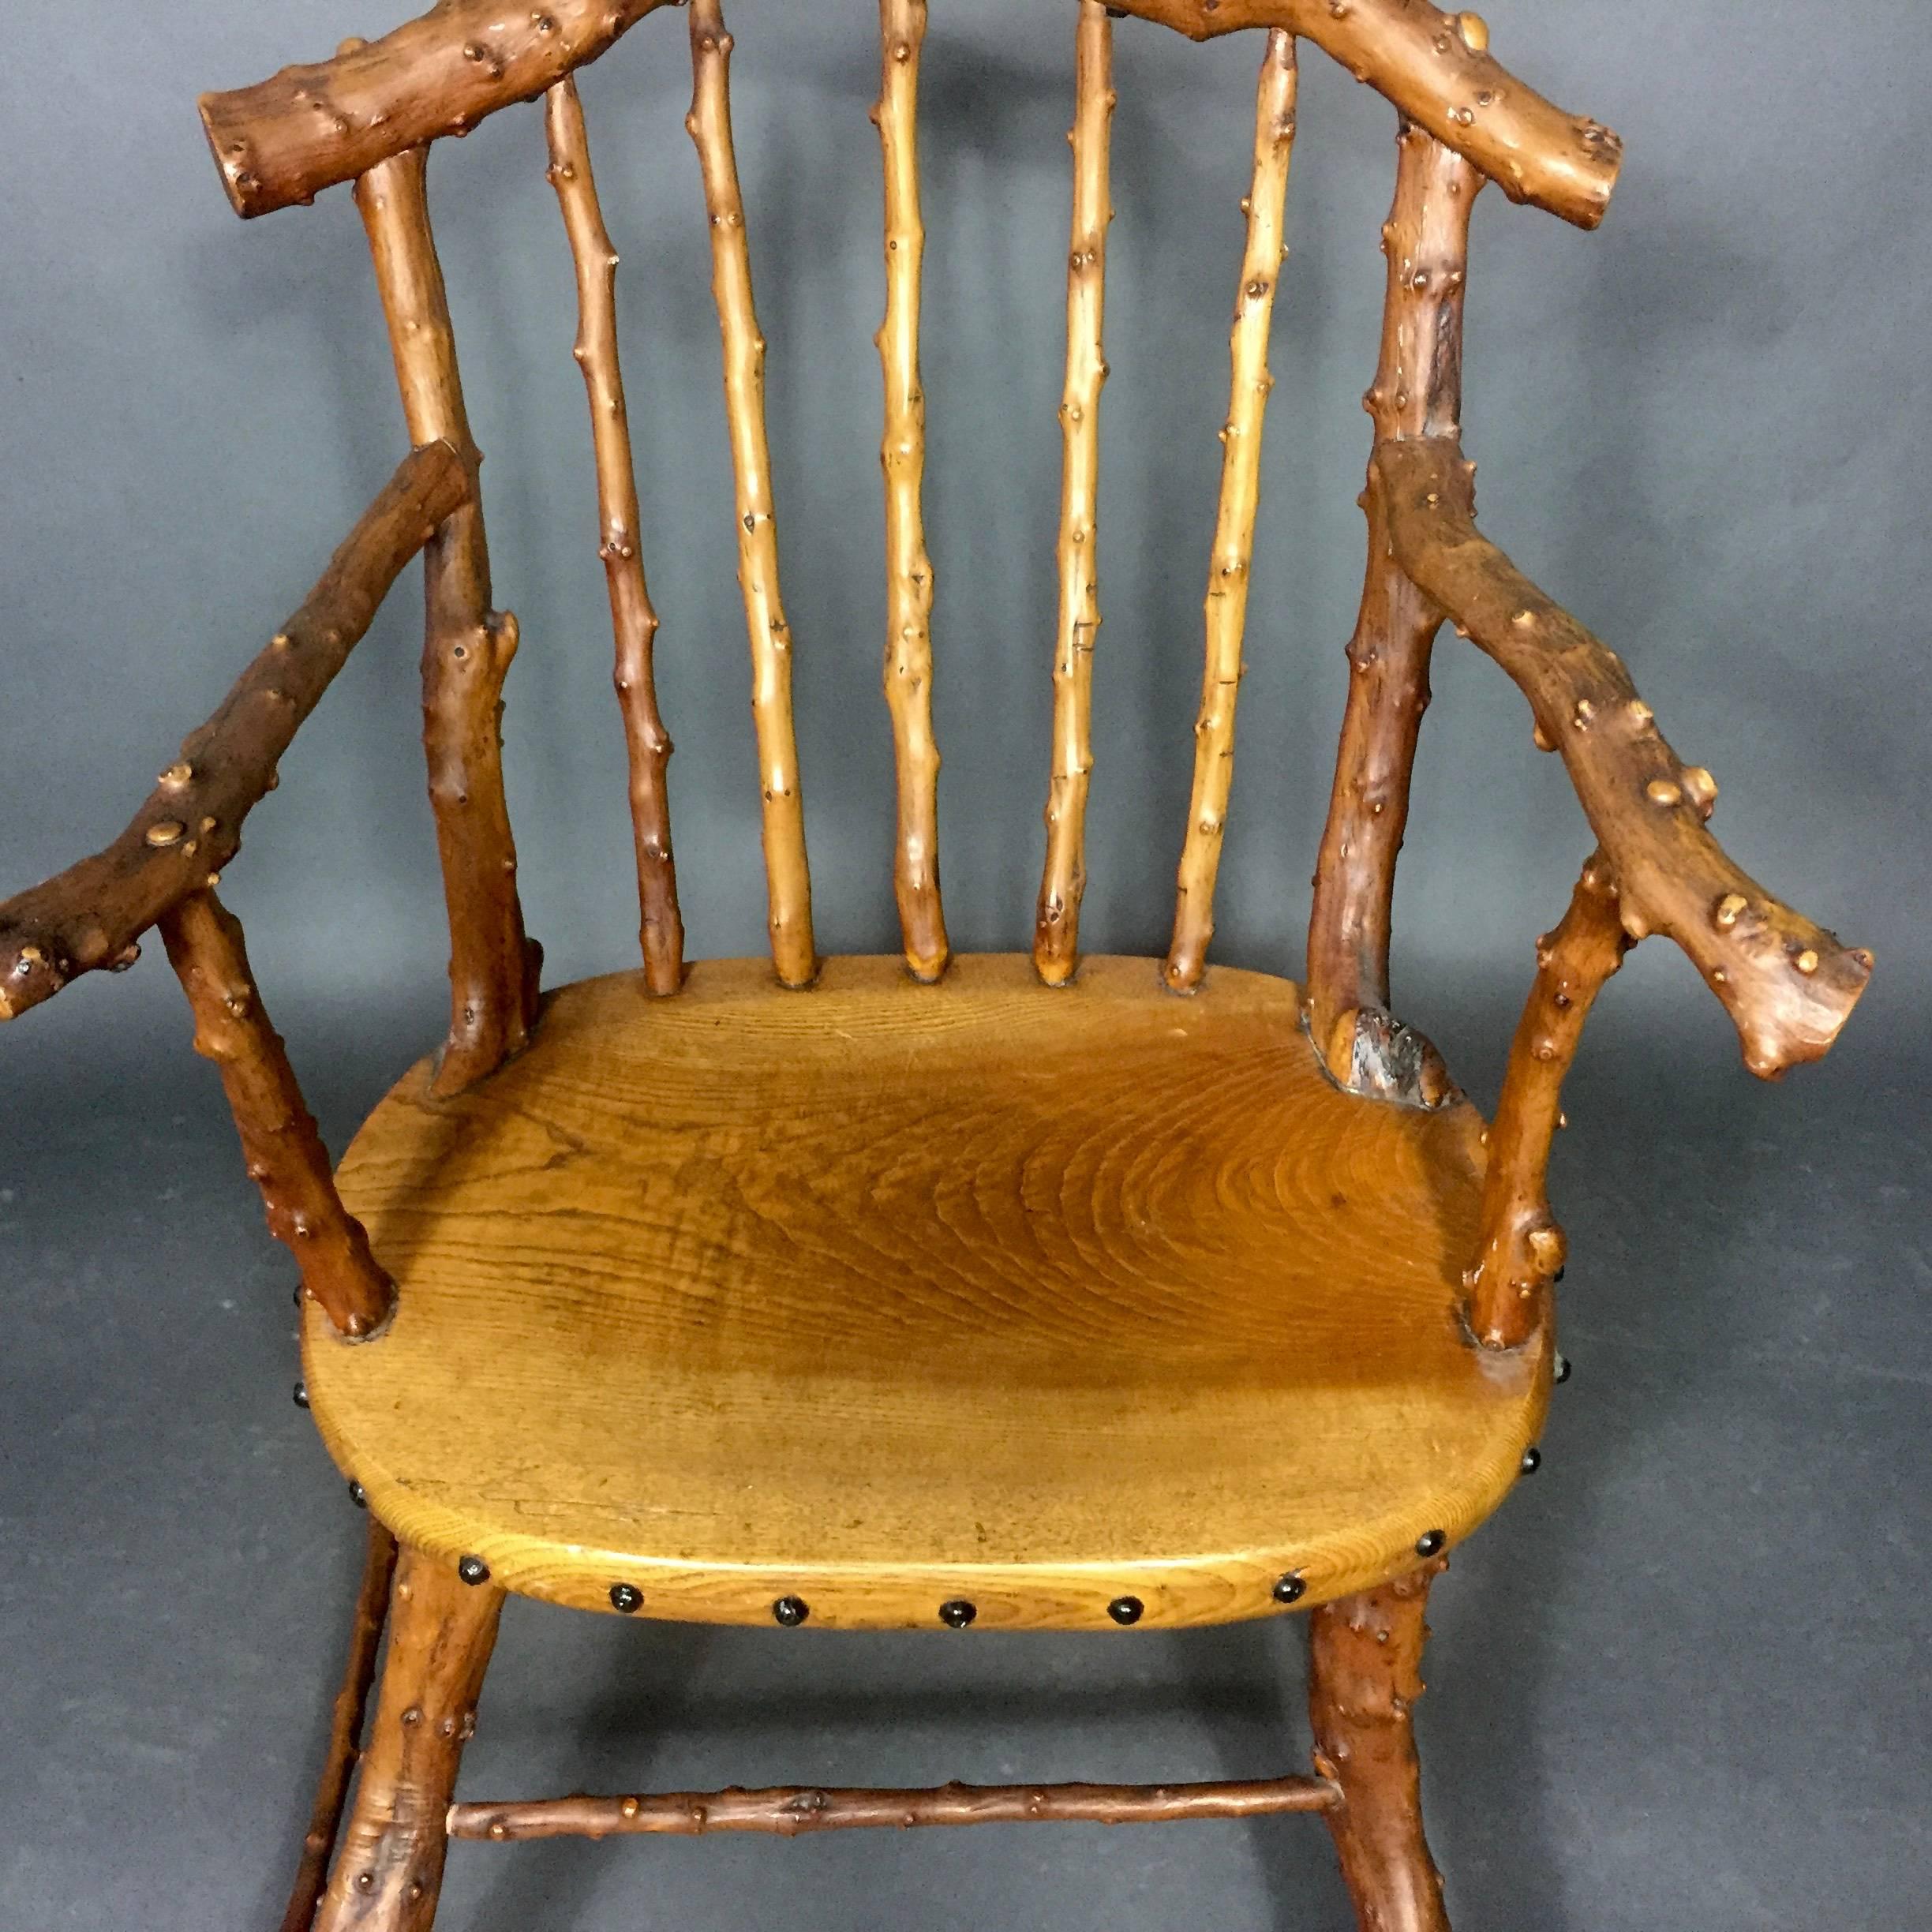 Chestnut Exceptional 19th Century English Arts & Crafts Yew Wood Armchair